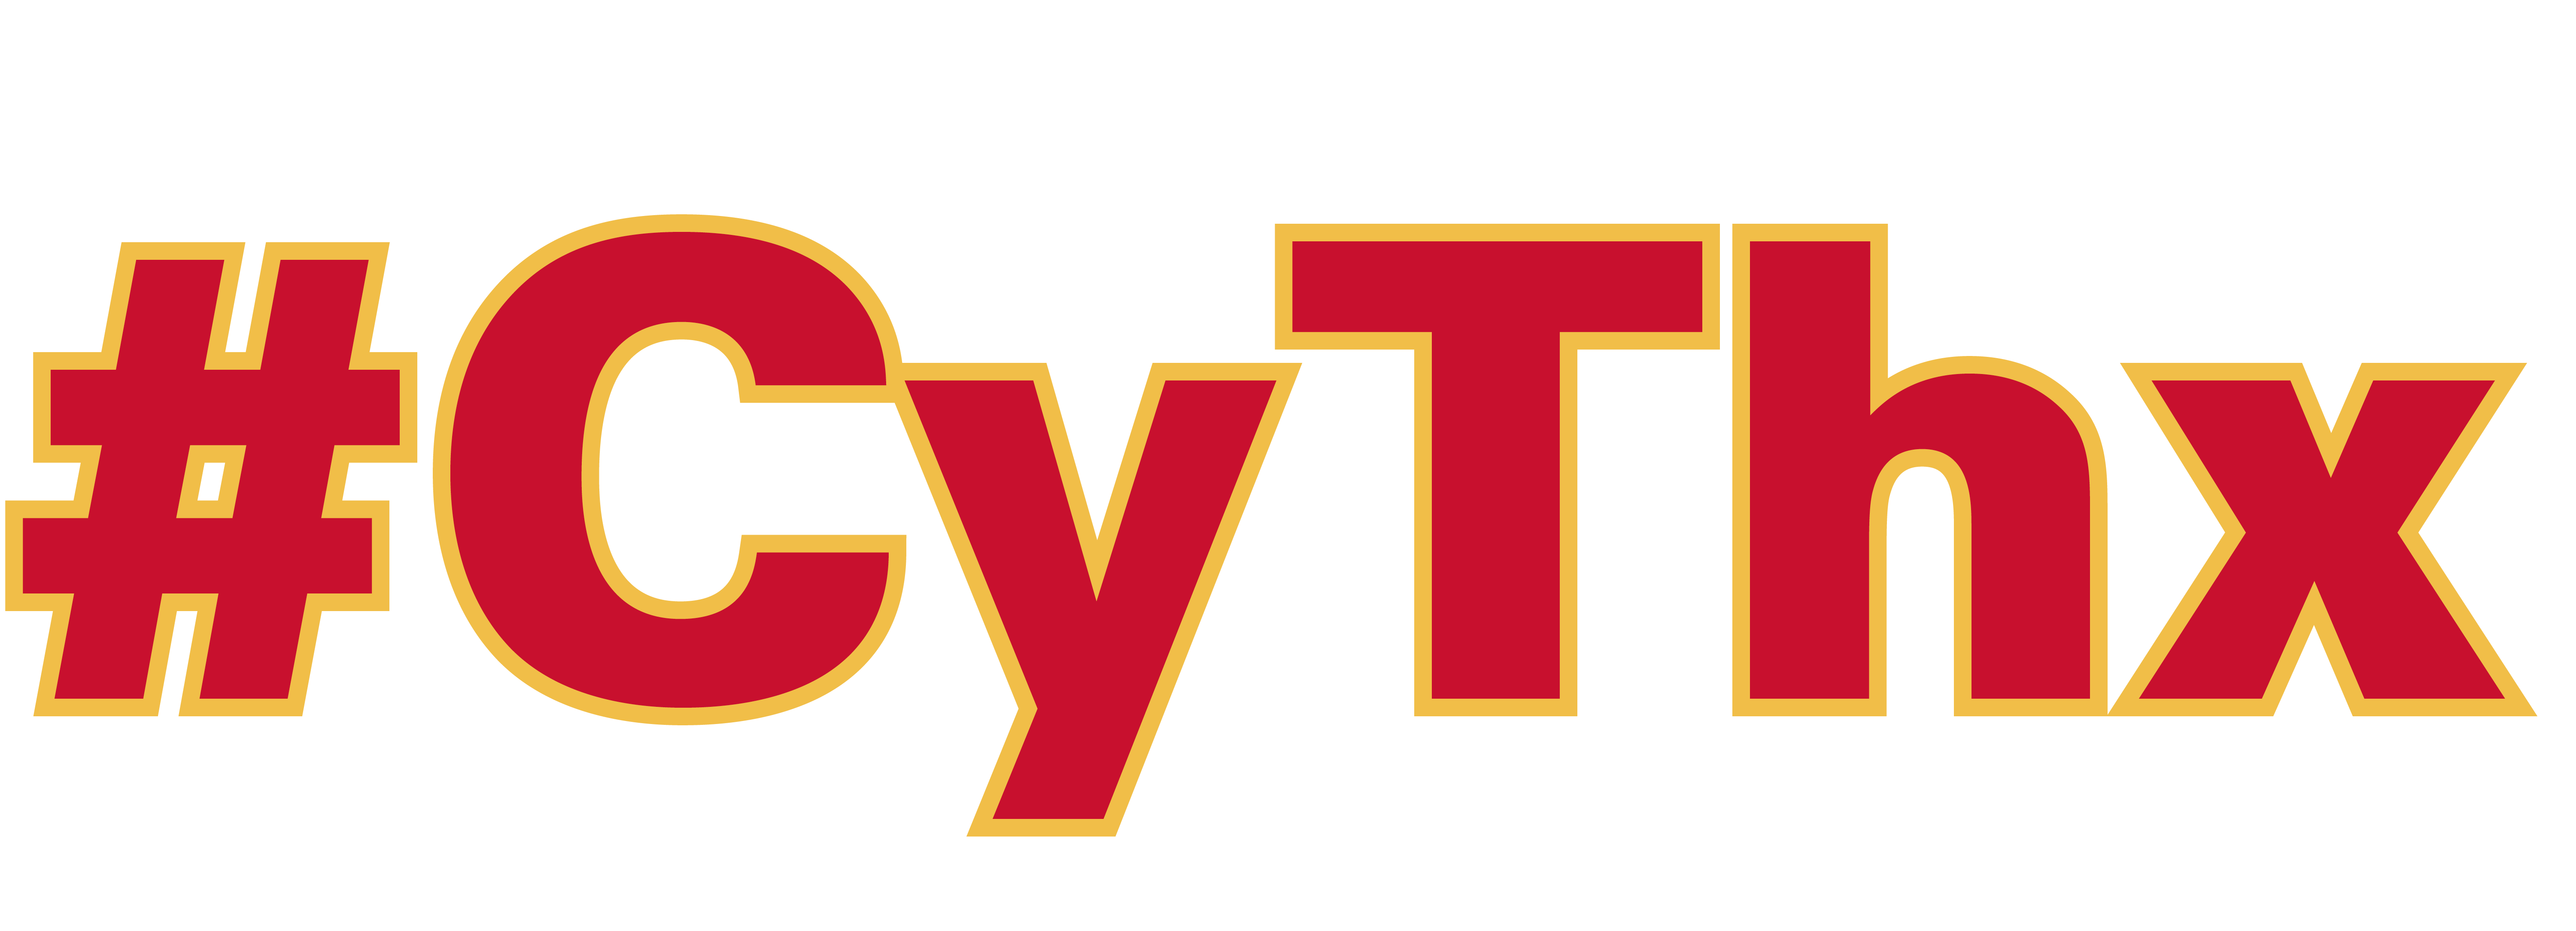 CyThx written in cardinal red font with gold outlines